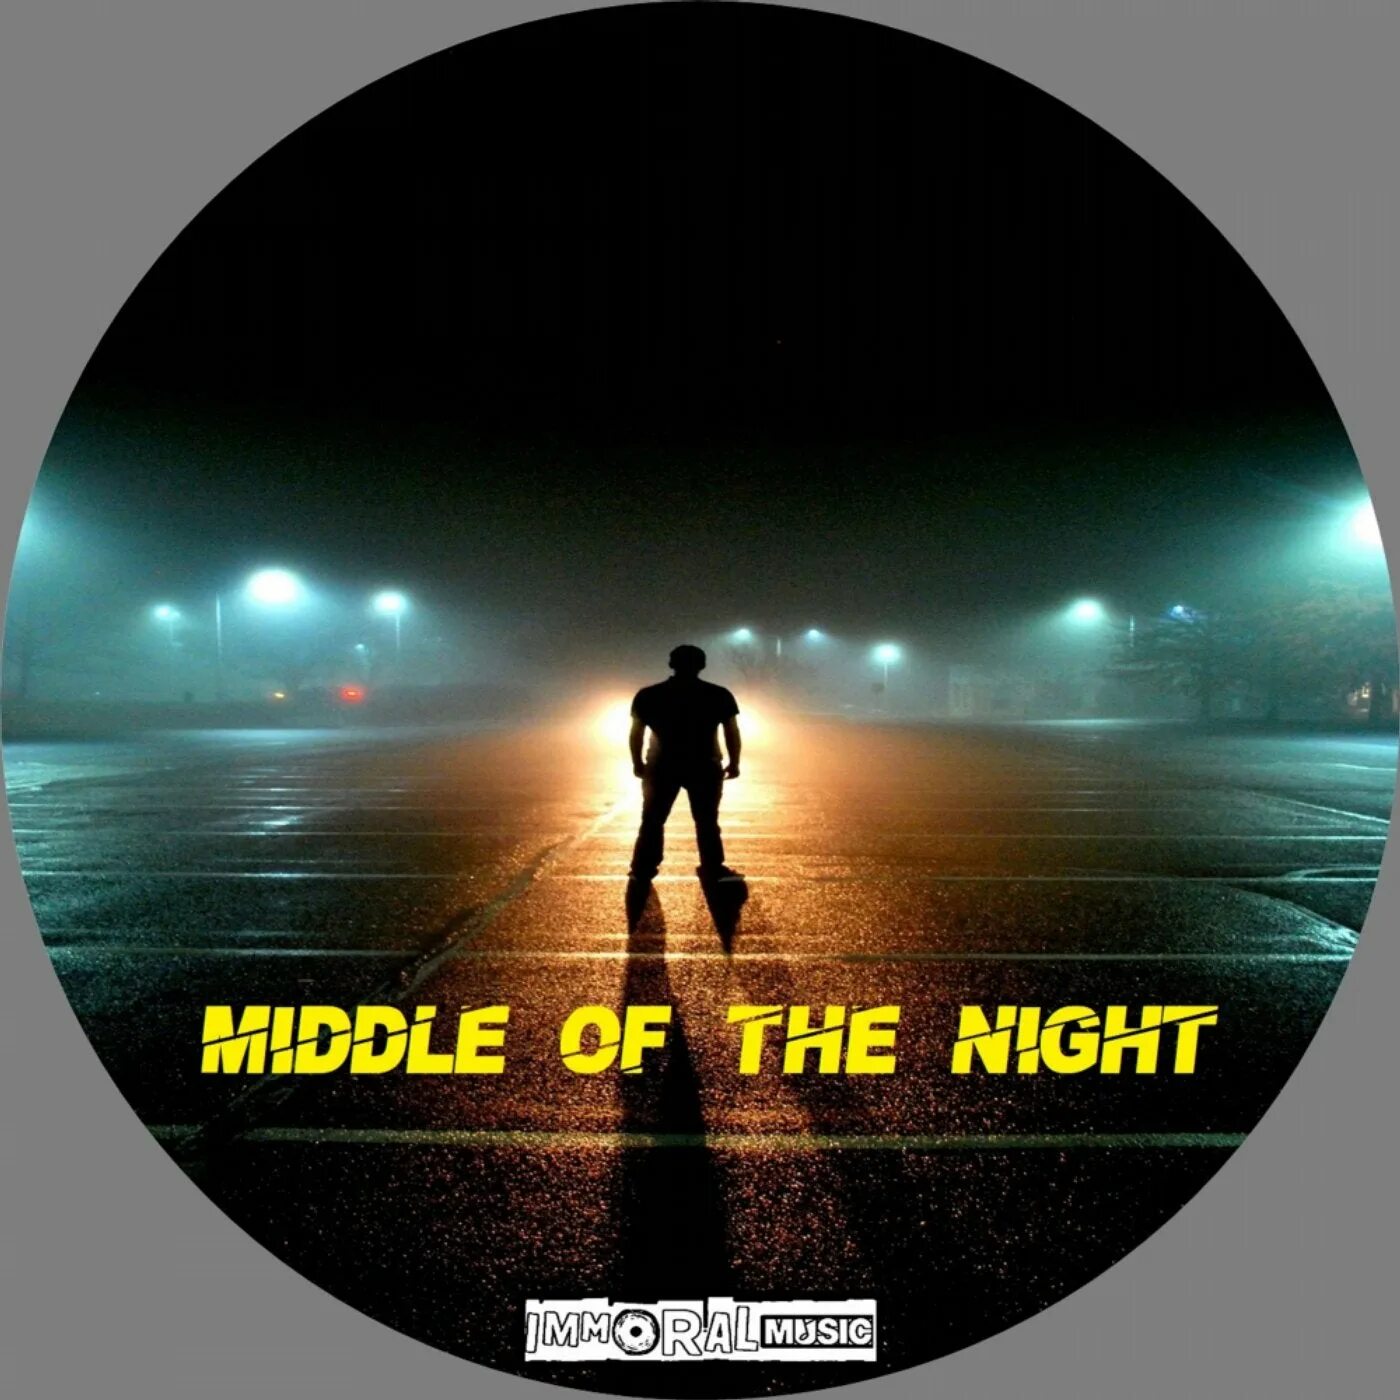 Middle of the Night. Middle of the Night обложка. In the Middle of the Night картинки. Трек Middle of the Night. Middle of the night mp3